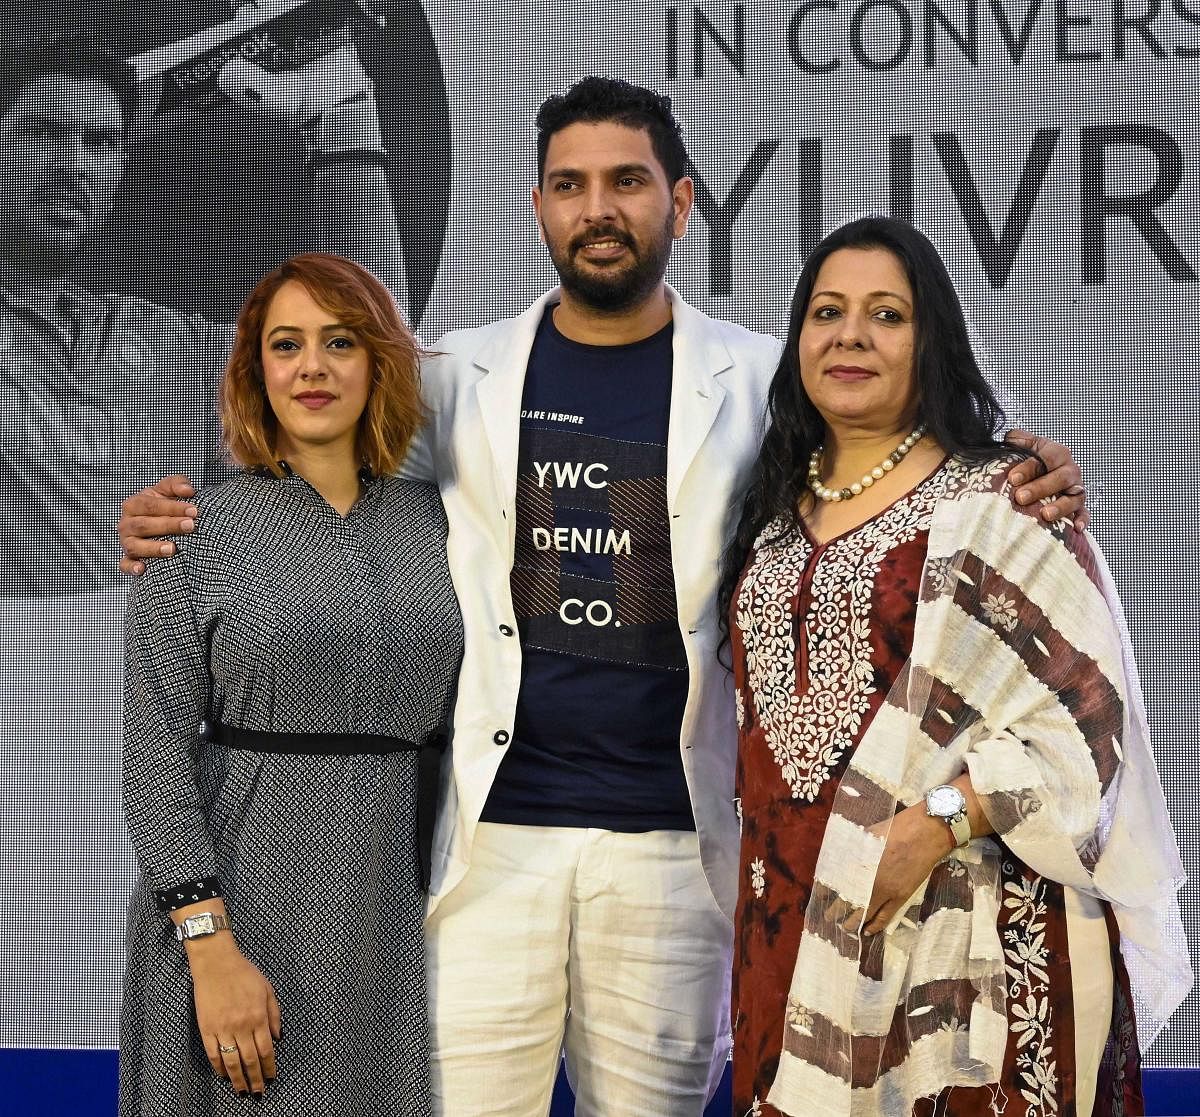 Cricketer Yuvraj Singh with his mother Shabnam and wife Hazel Keech at the event 'In Conversation With Yuvraj Singh' in Mumbai, Monday, June 10, 2019. Singh has announced his retirement from international cricket. (PTI Photo/Shirish Shete)